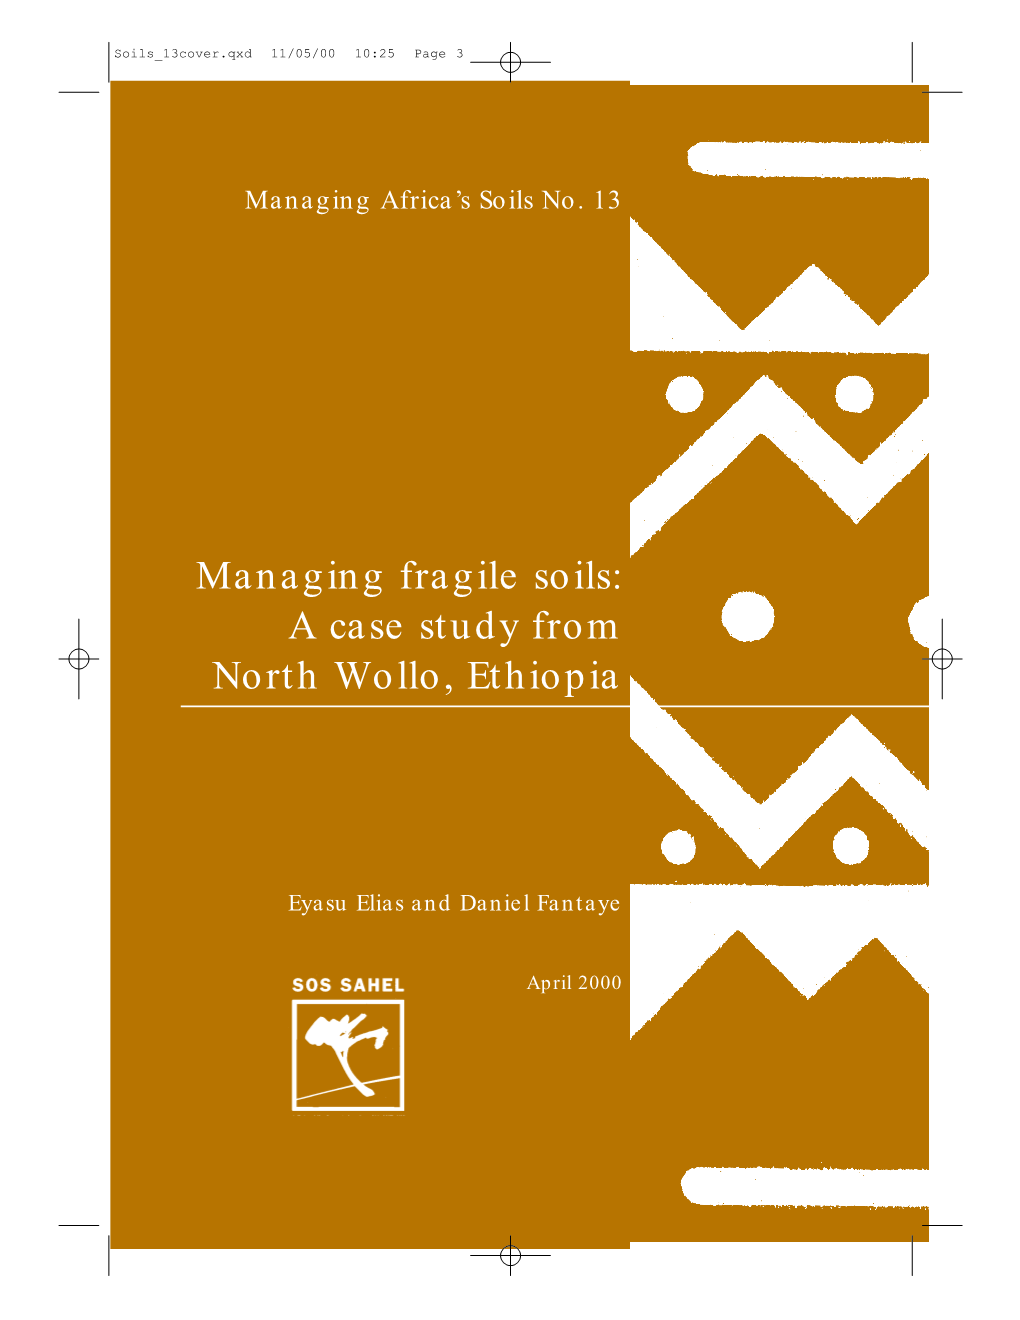 Managing Fragile Soils: a Case Study from North Wollo, Ethiopia